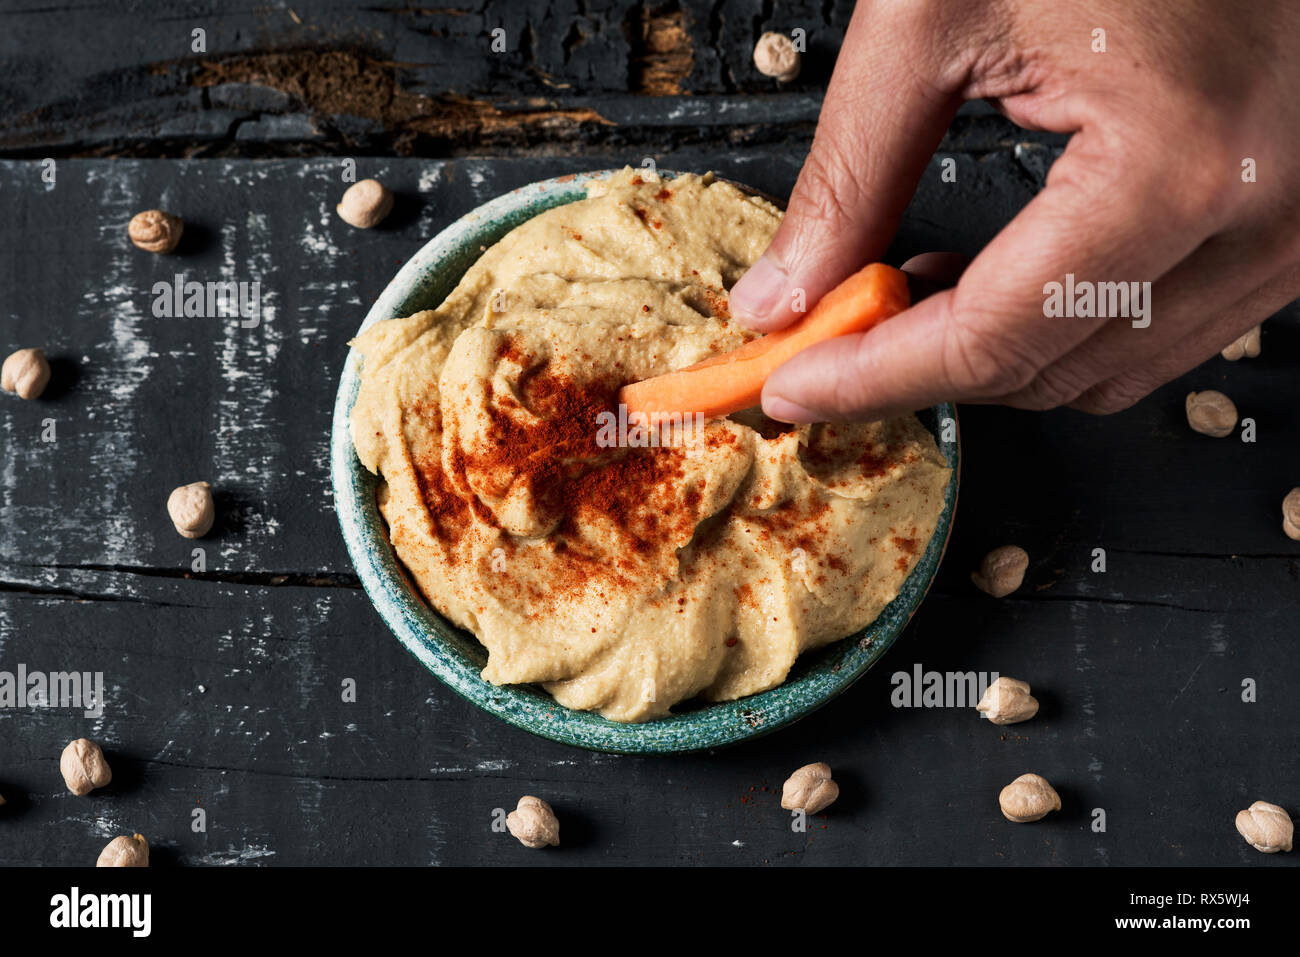 high angle view of a man dipping a strip of carrot in a homemade hummus seasoned with paprika served in a green ceramic plate, on a dark gray rustic w Stock Photo